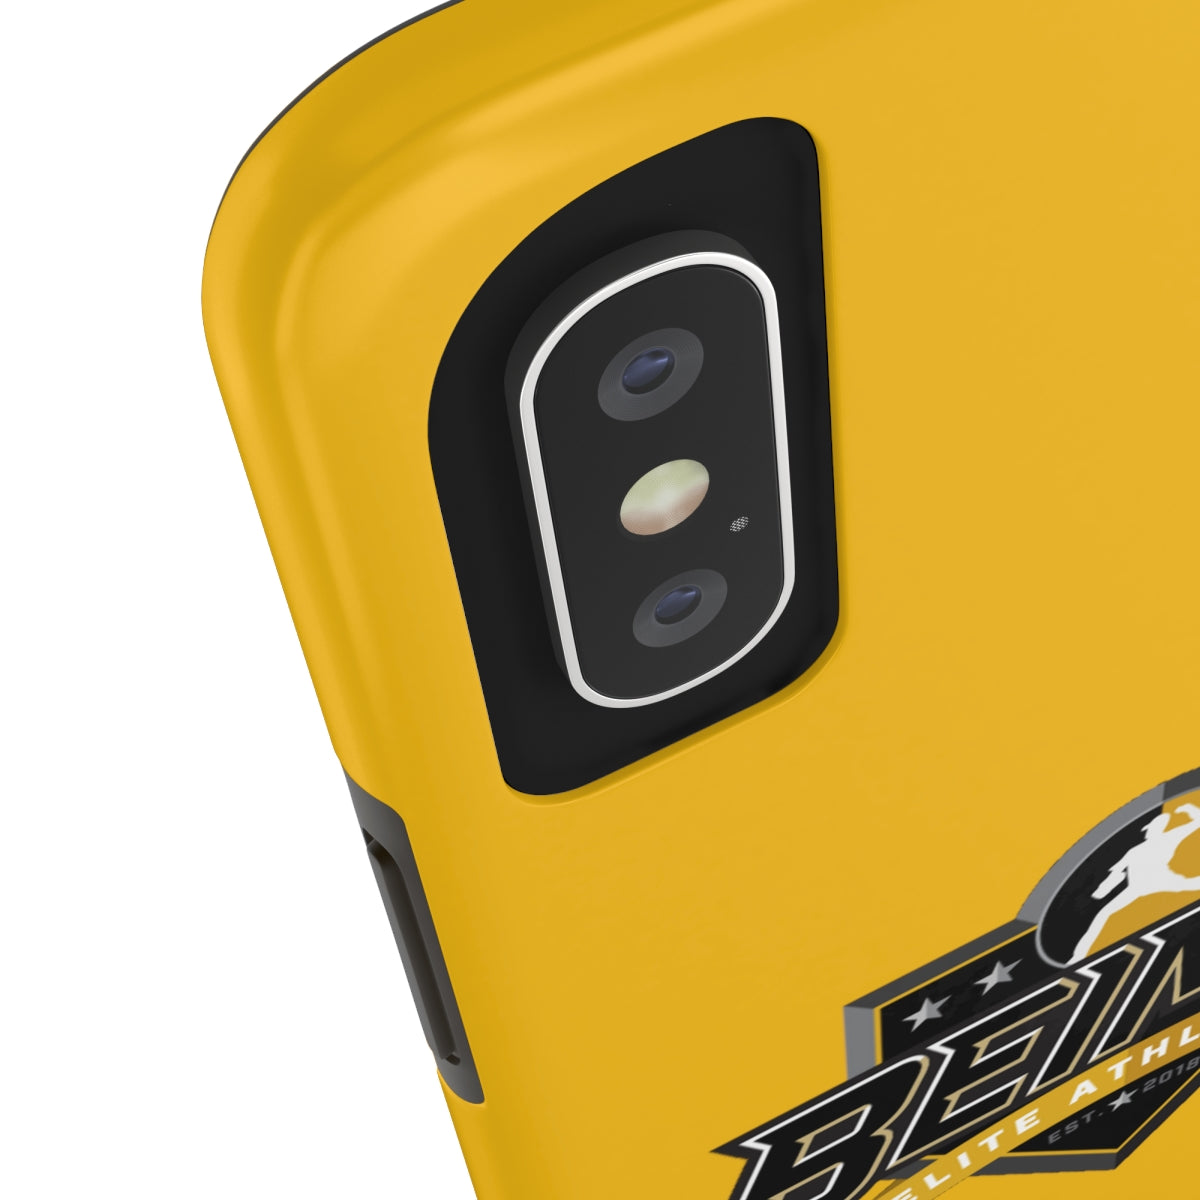 Tough iPhone Cases Yellow